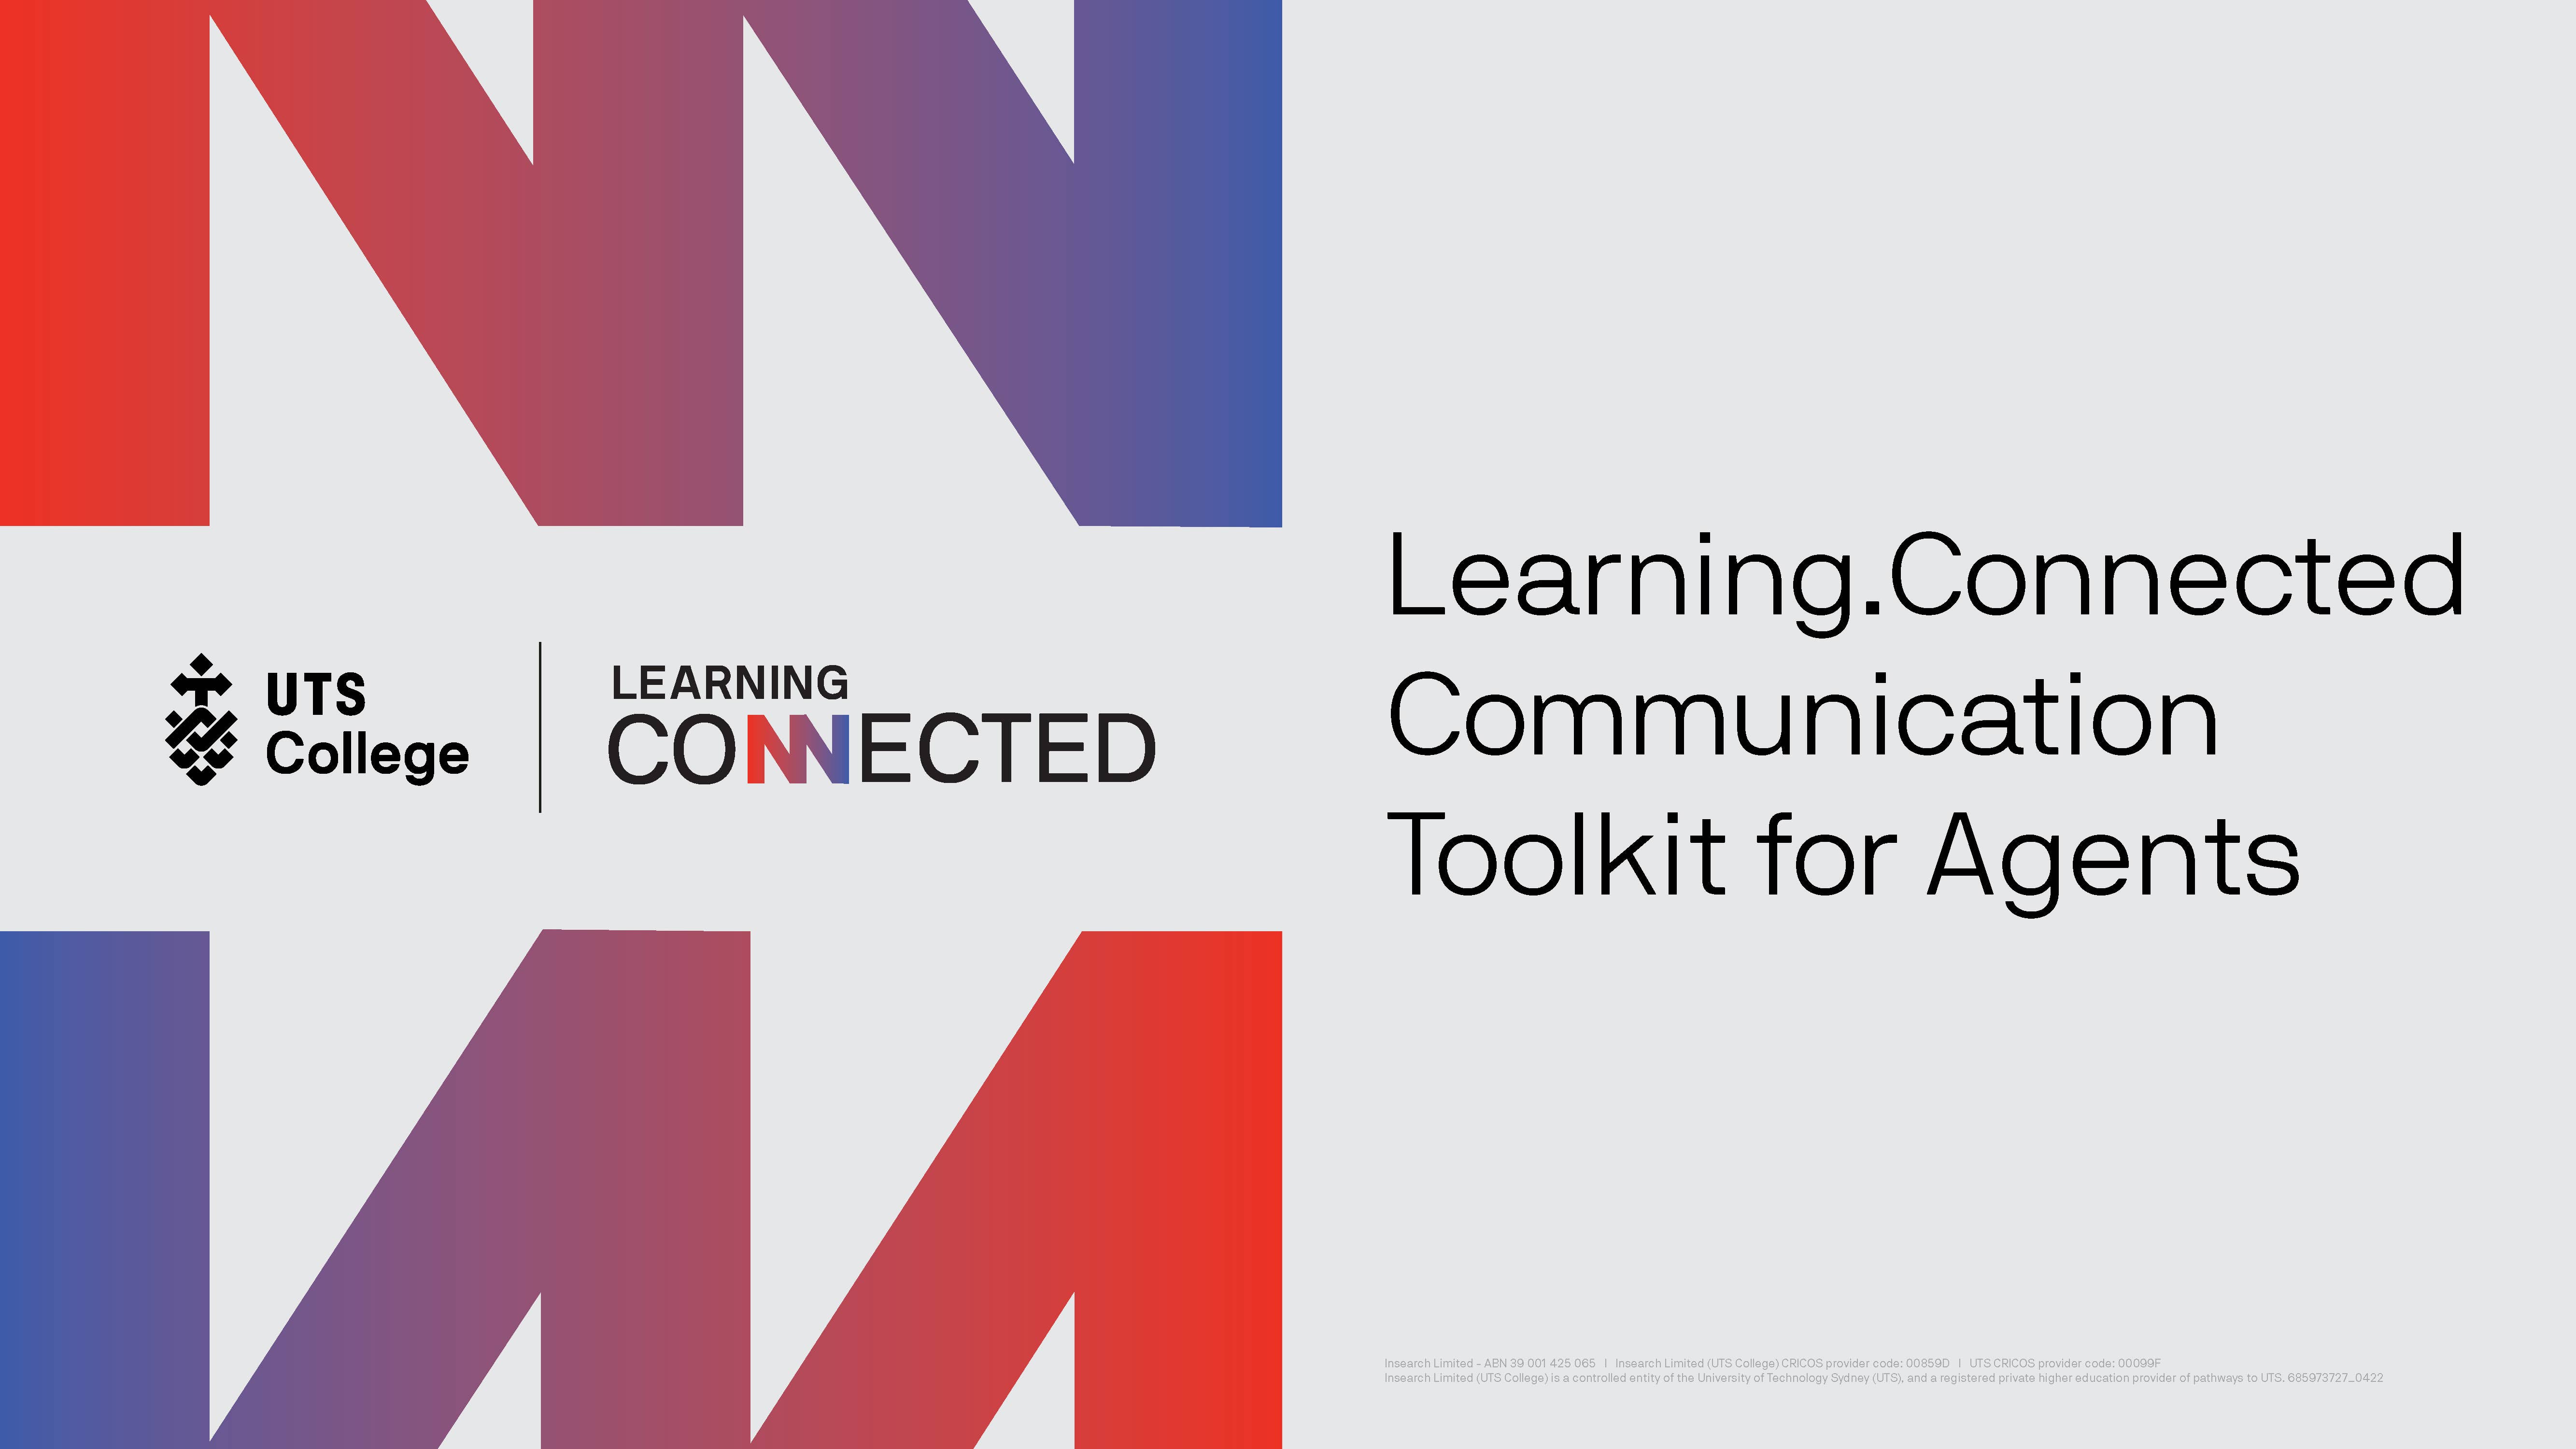 Download the Communication Toolkit